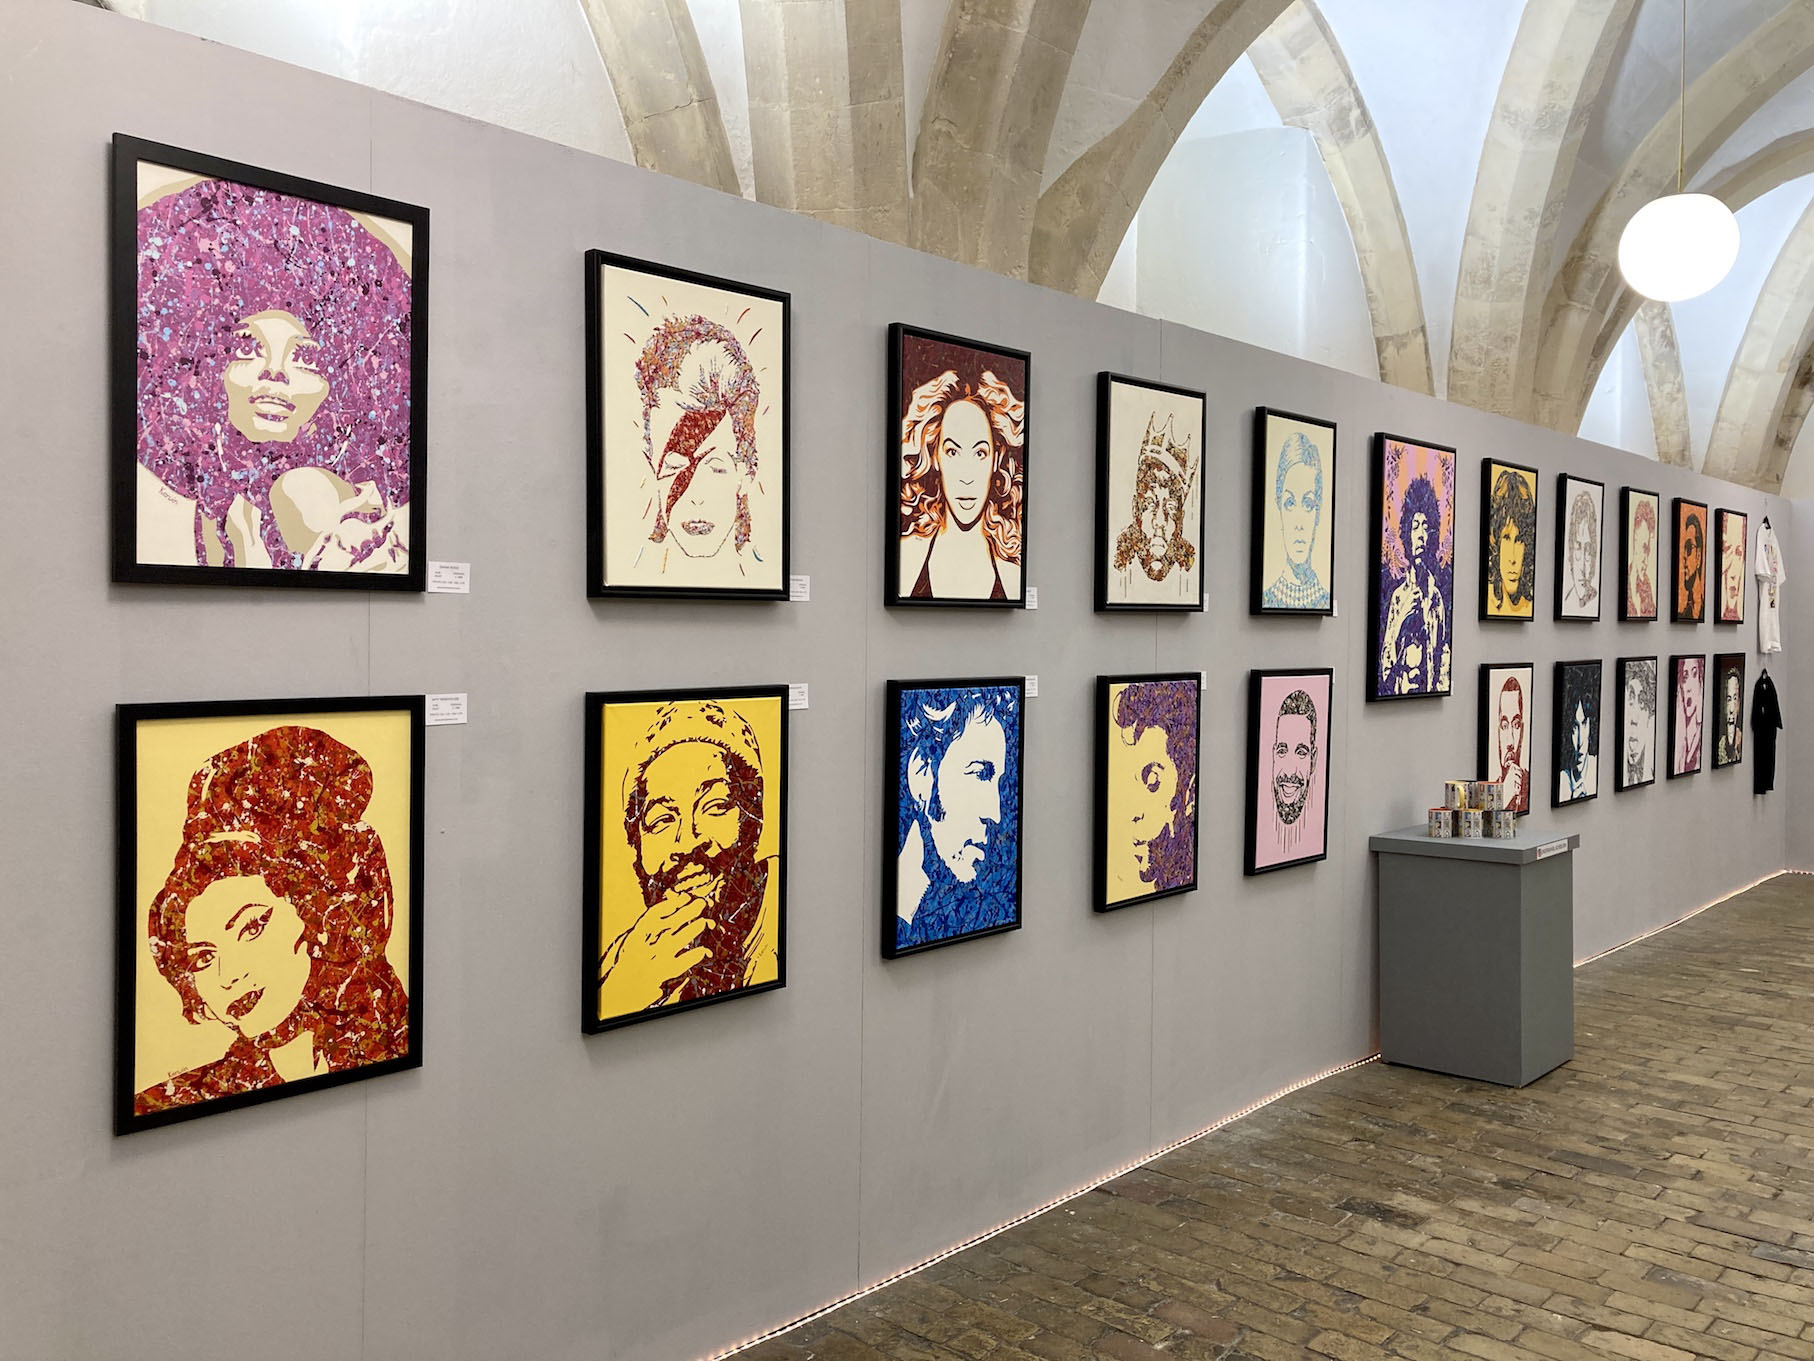 Kerwin Blackburn exhibits his Jackson Pollock-inspired artwork at Norwich School's Crypt Gallery, March-February 2022 | By Kerwin